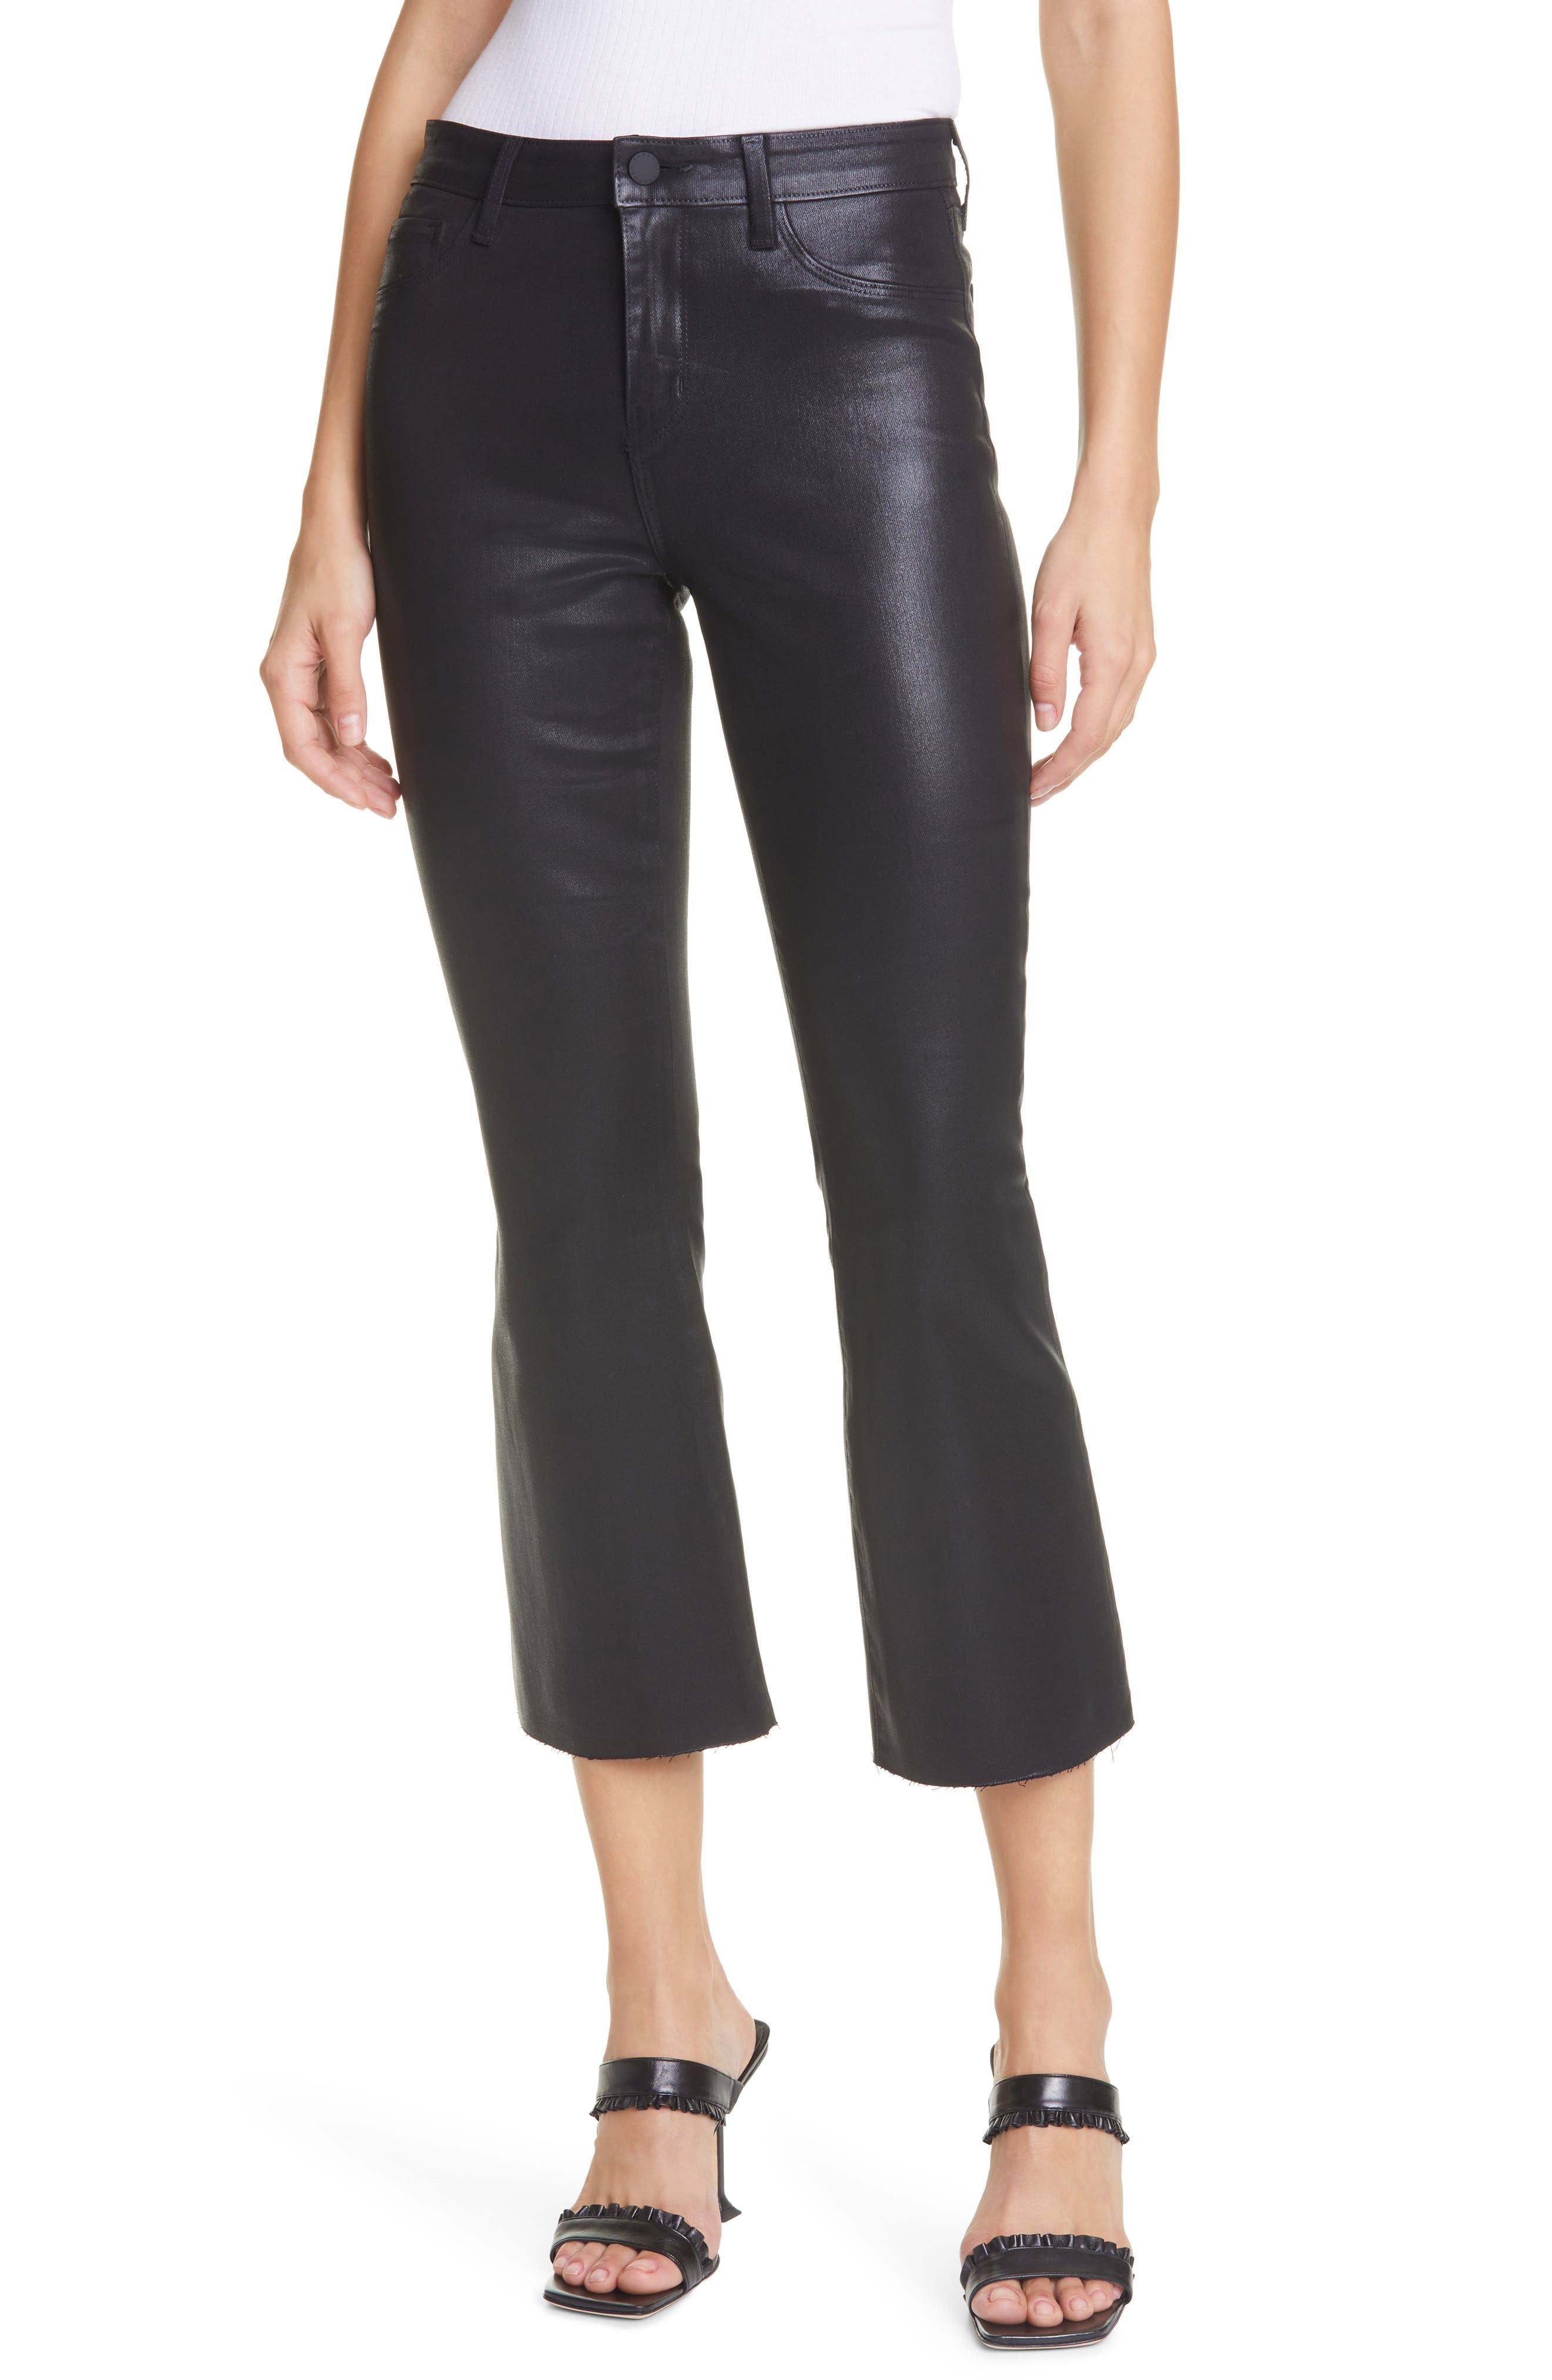 L'AGENCE Kendra Coated High Waist Crop Flare Jeans in Noir Coated